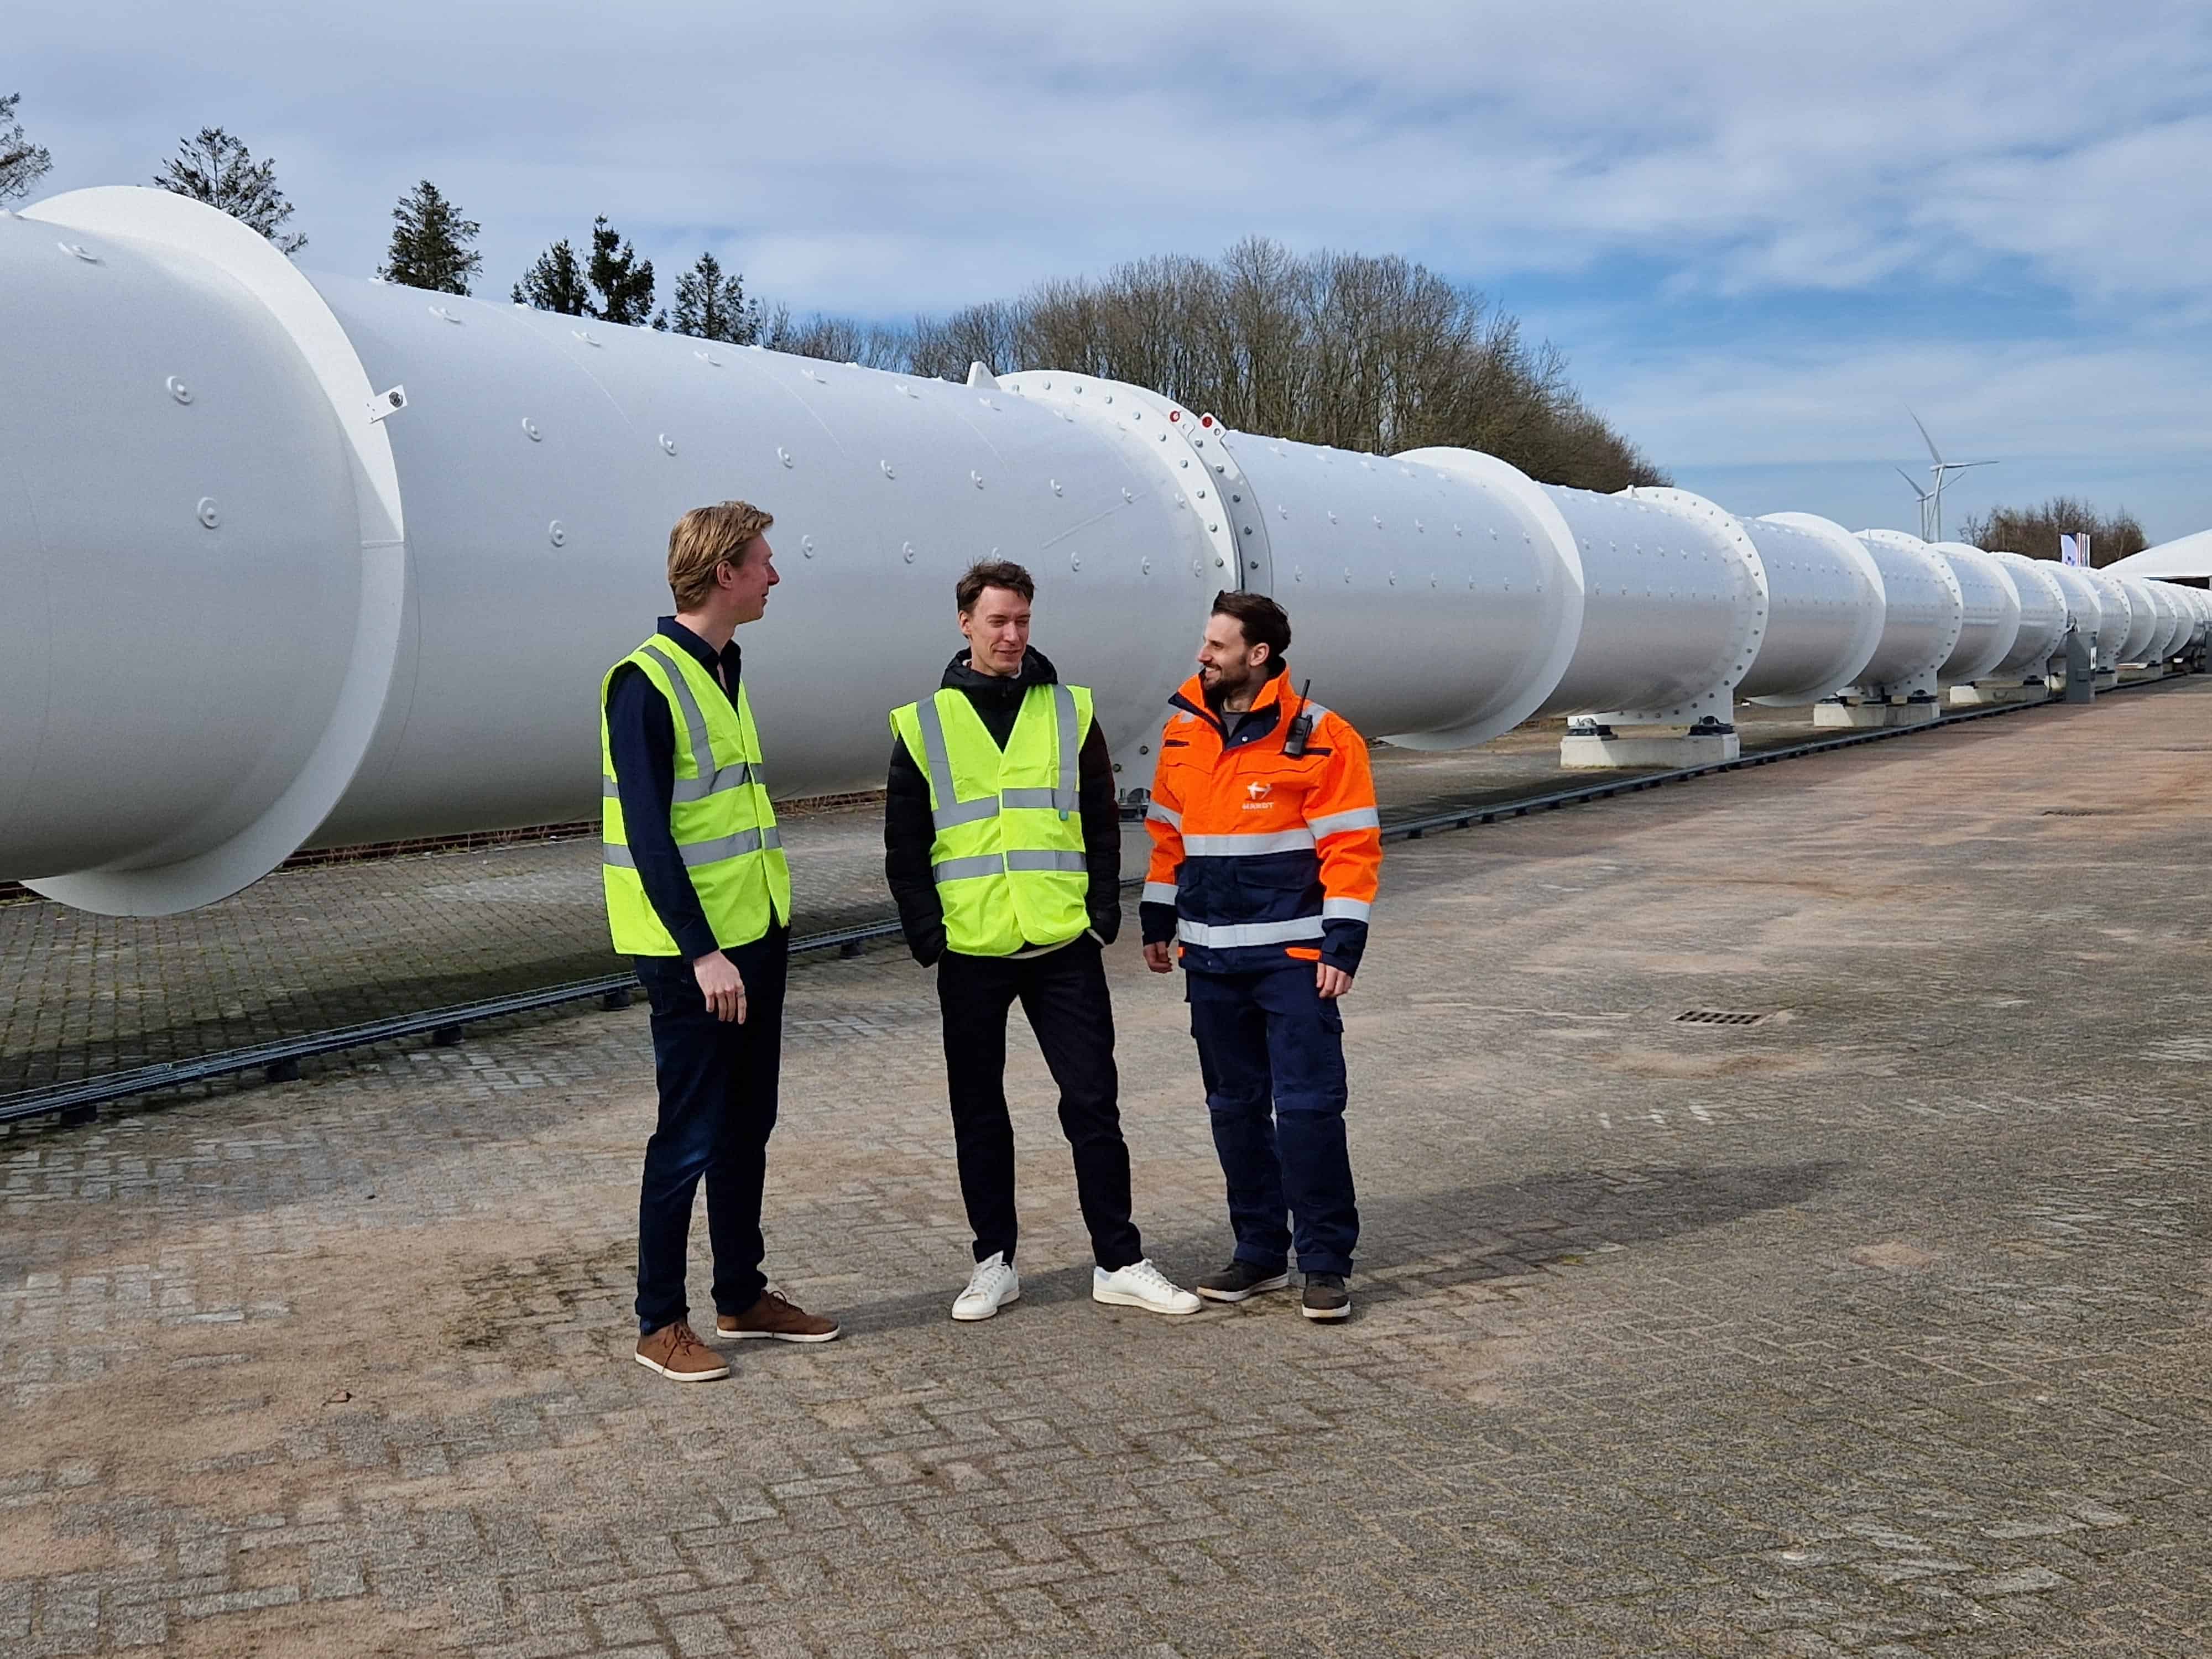 Curtain falls: the European Hyperloop Center is open for tests